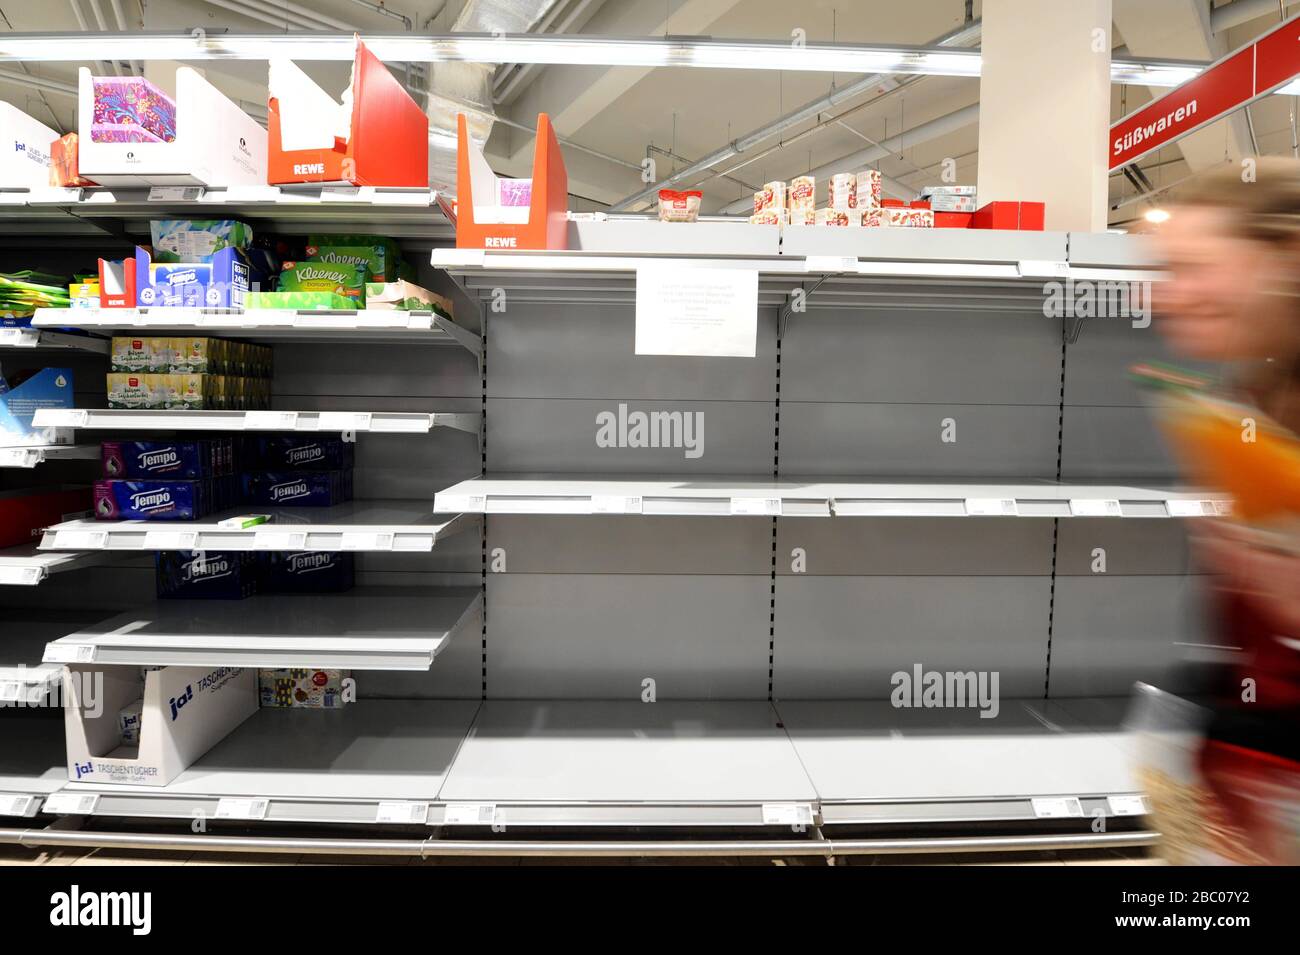 Food shopping in times of the Corona pandemic: in the picture empty shelves of toilet paper and pasta in a branch of the supermarket chain Rewe in Obergiesing. Most customers wear mouthguards to prevent infection with the novel virus. [automated translation] Stock Photo